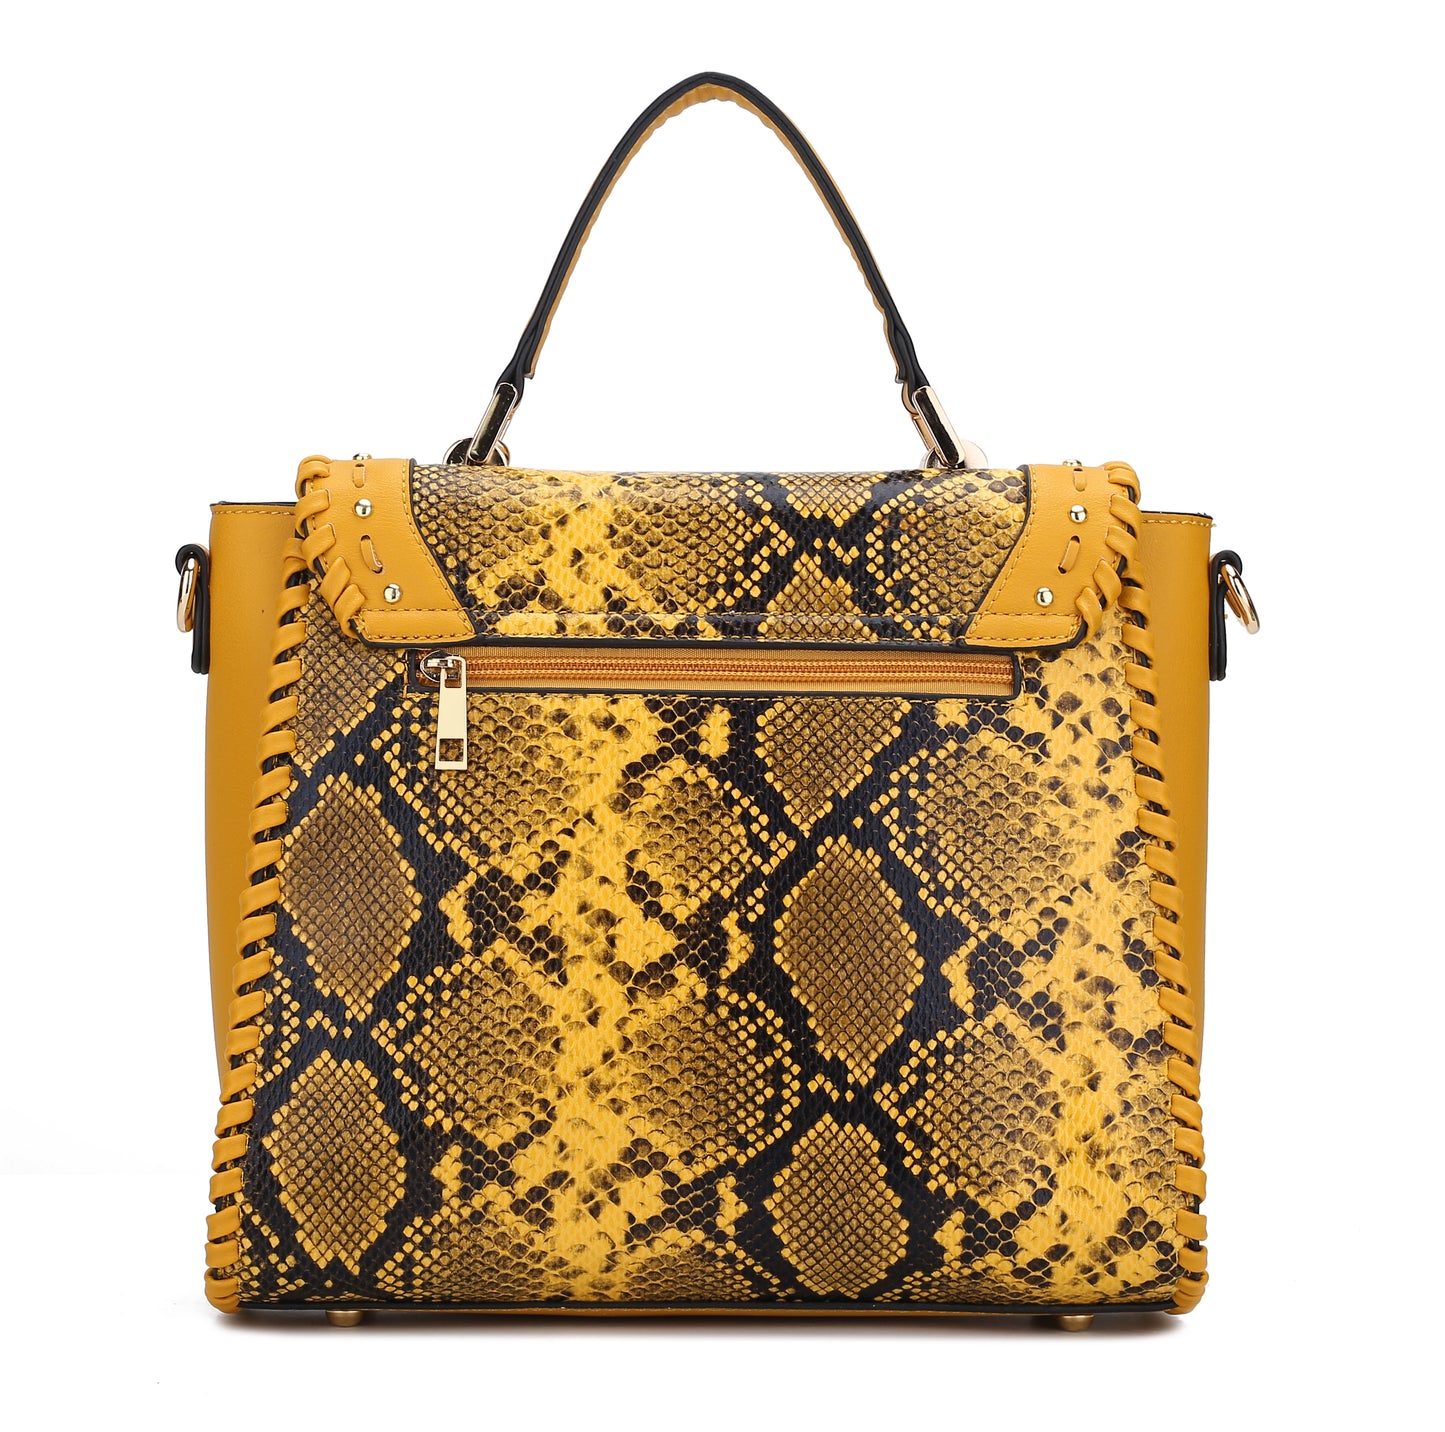 The Pink Orpheus Lilli Satchel Handbag Vegan Leather Women features a striking snake print design in yellow and black.